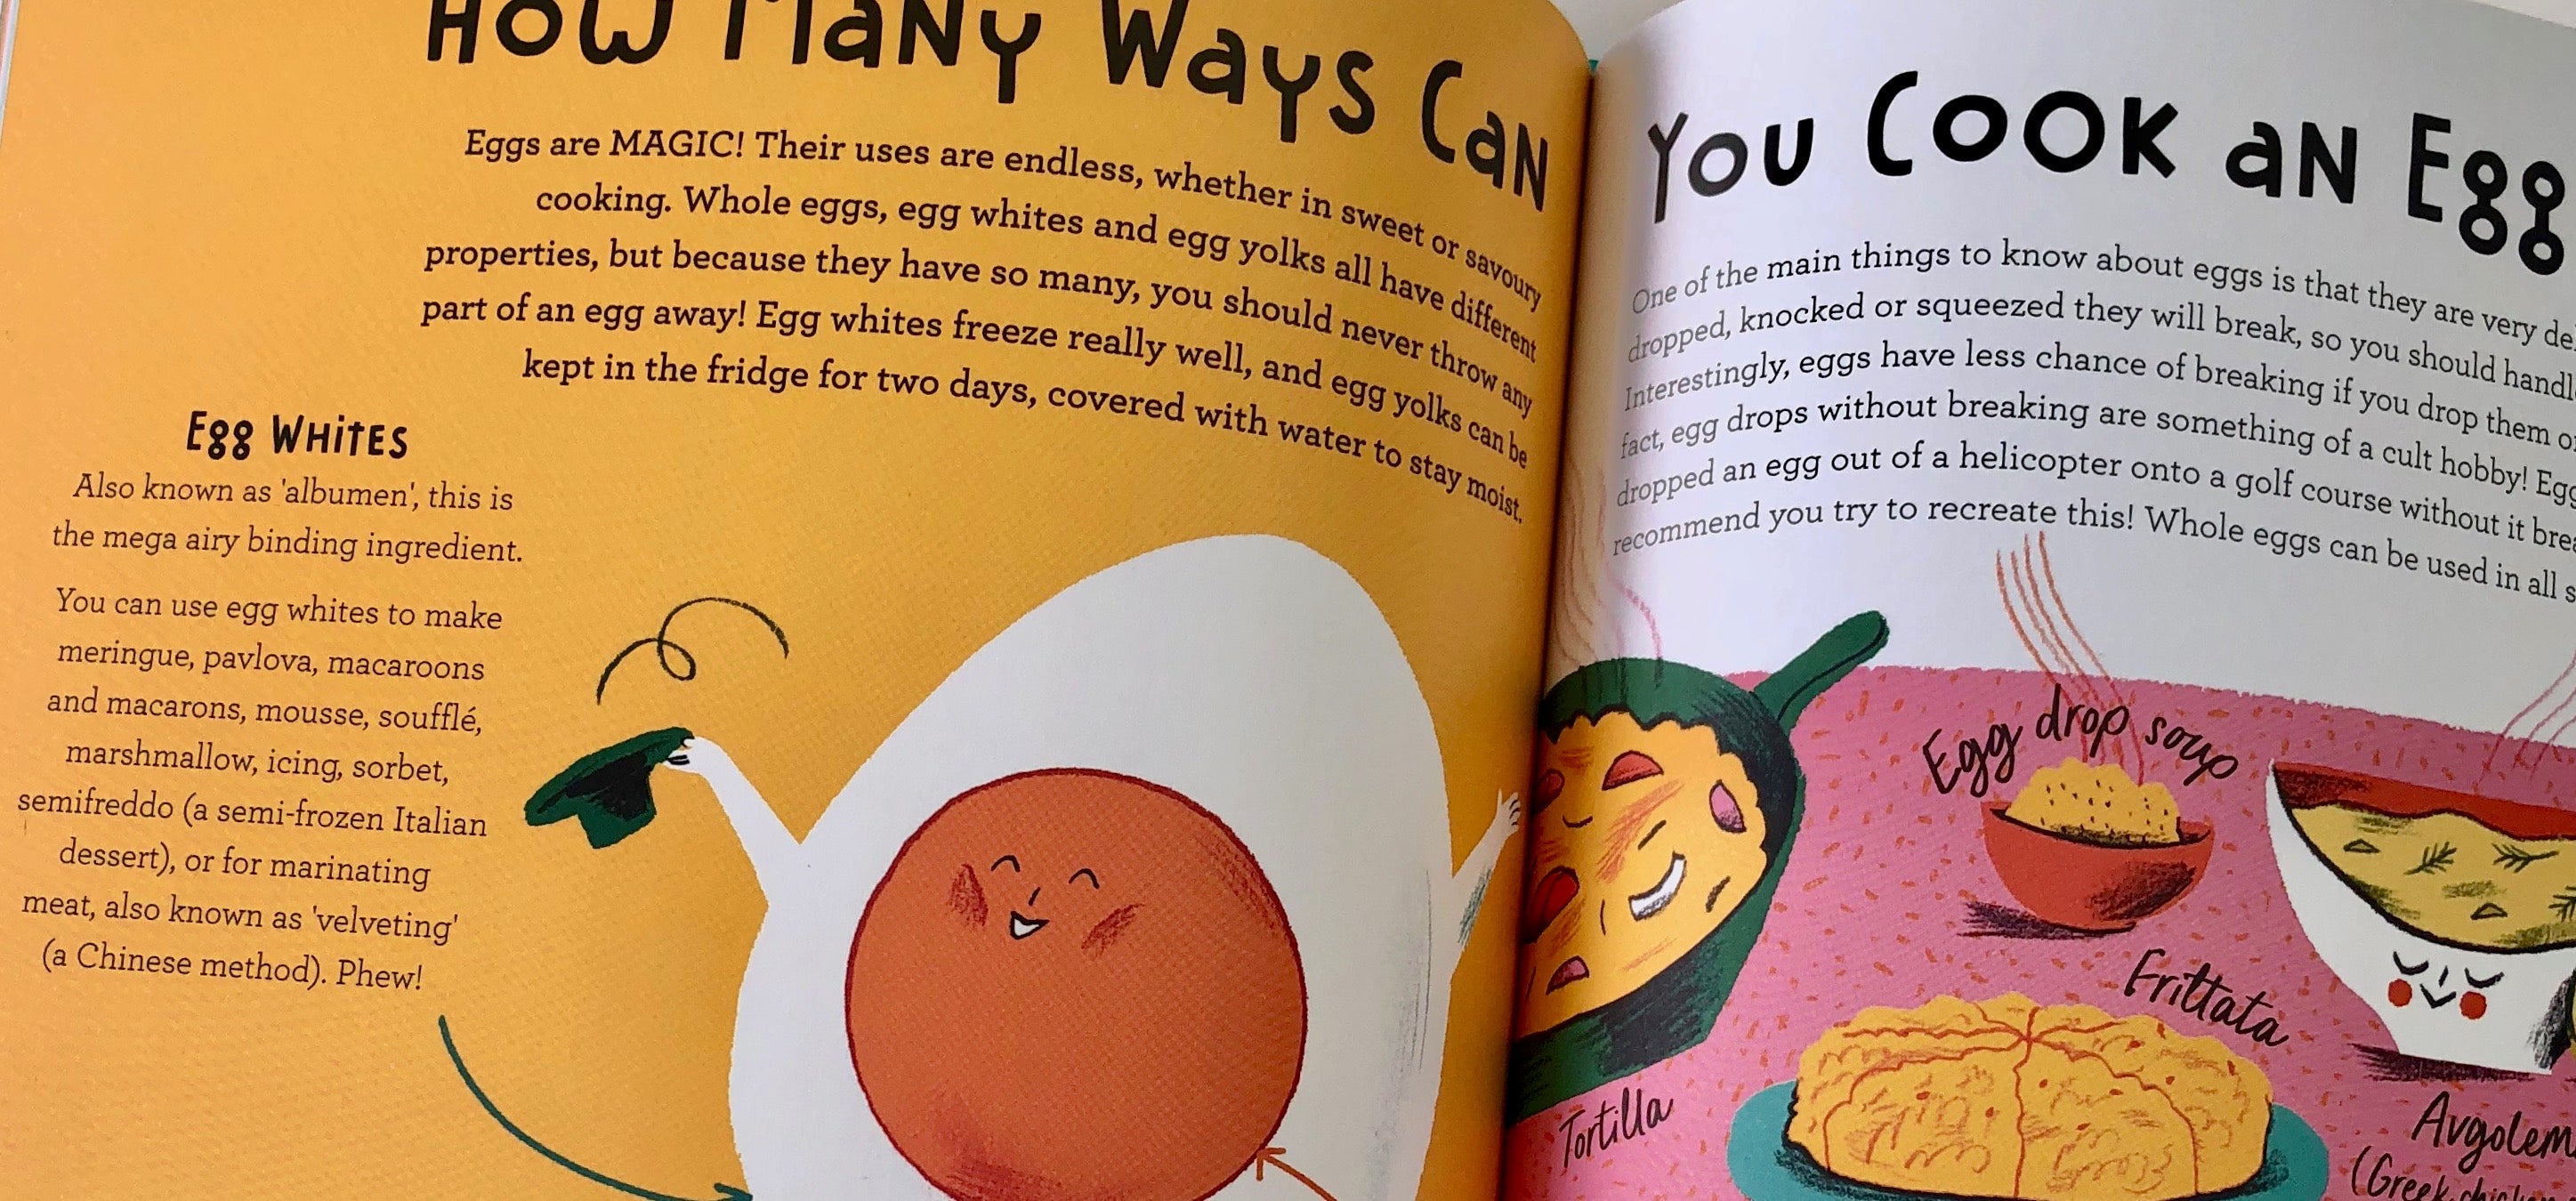 How Many Ways Can You Cook An Egg?